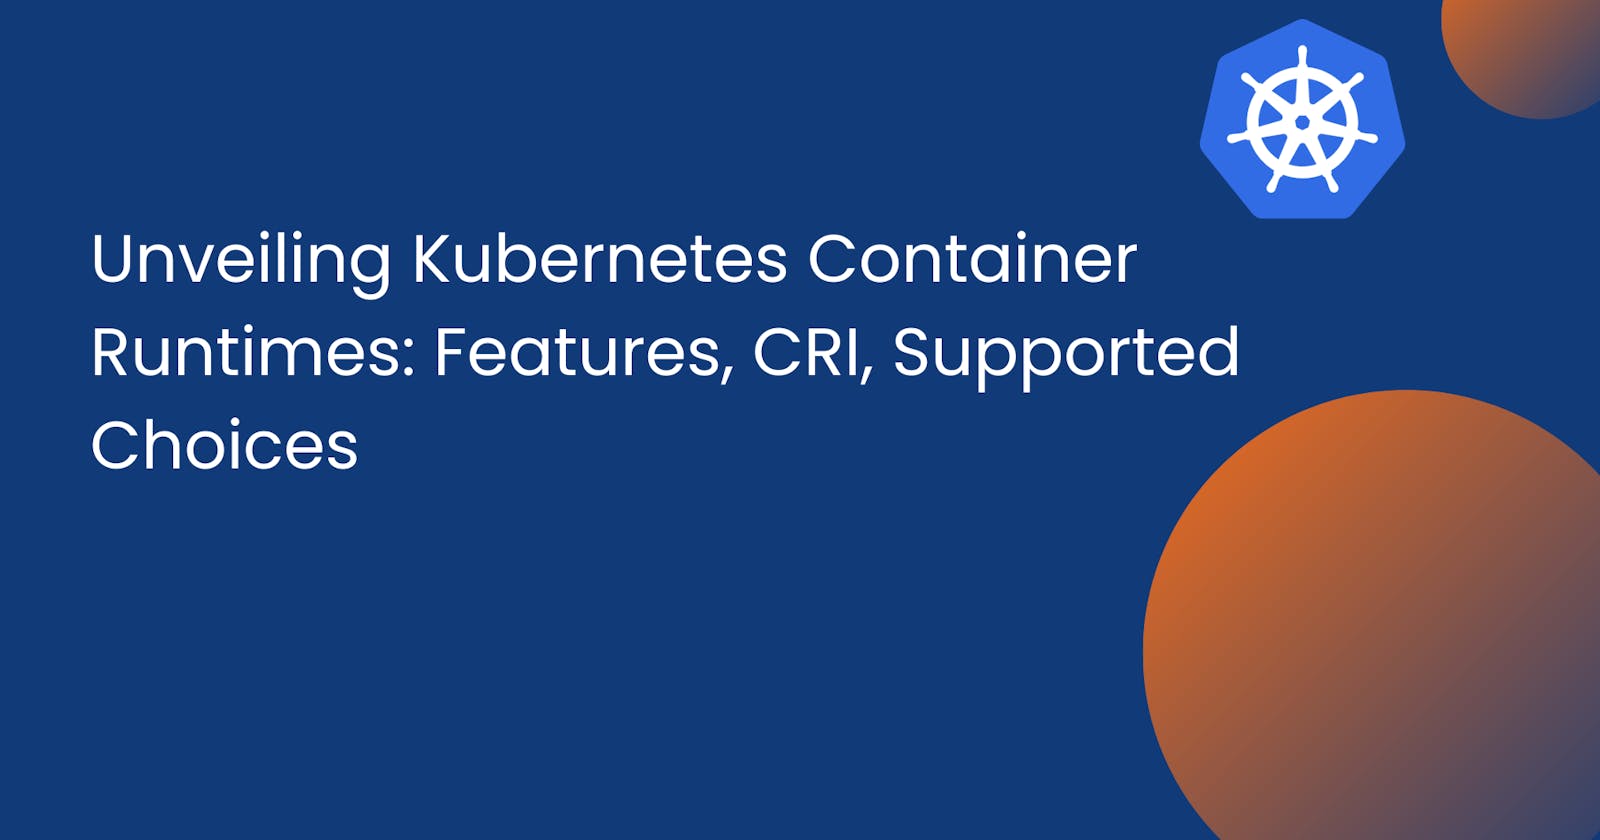 Unveiling Kubernetes Container Runtimes: Features, CRI, Supported Choices